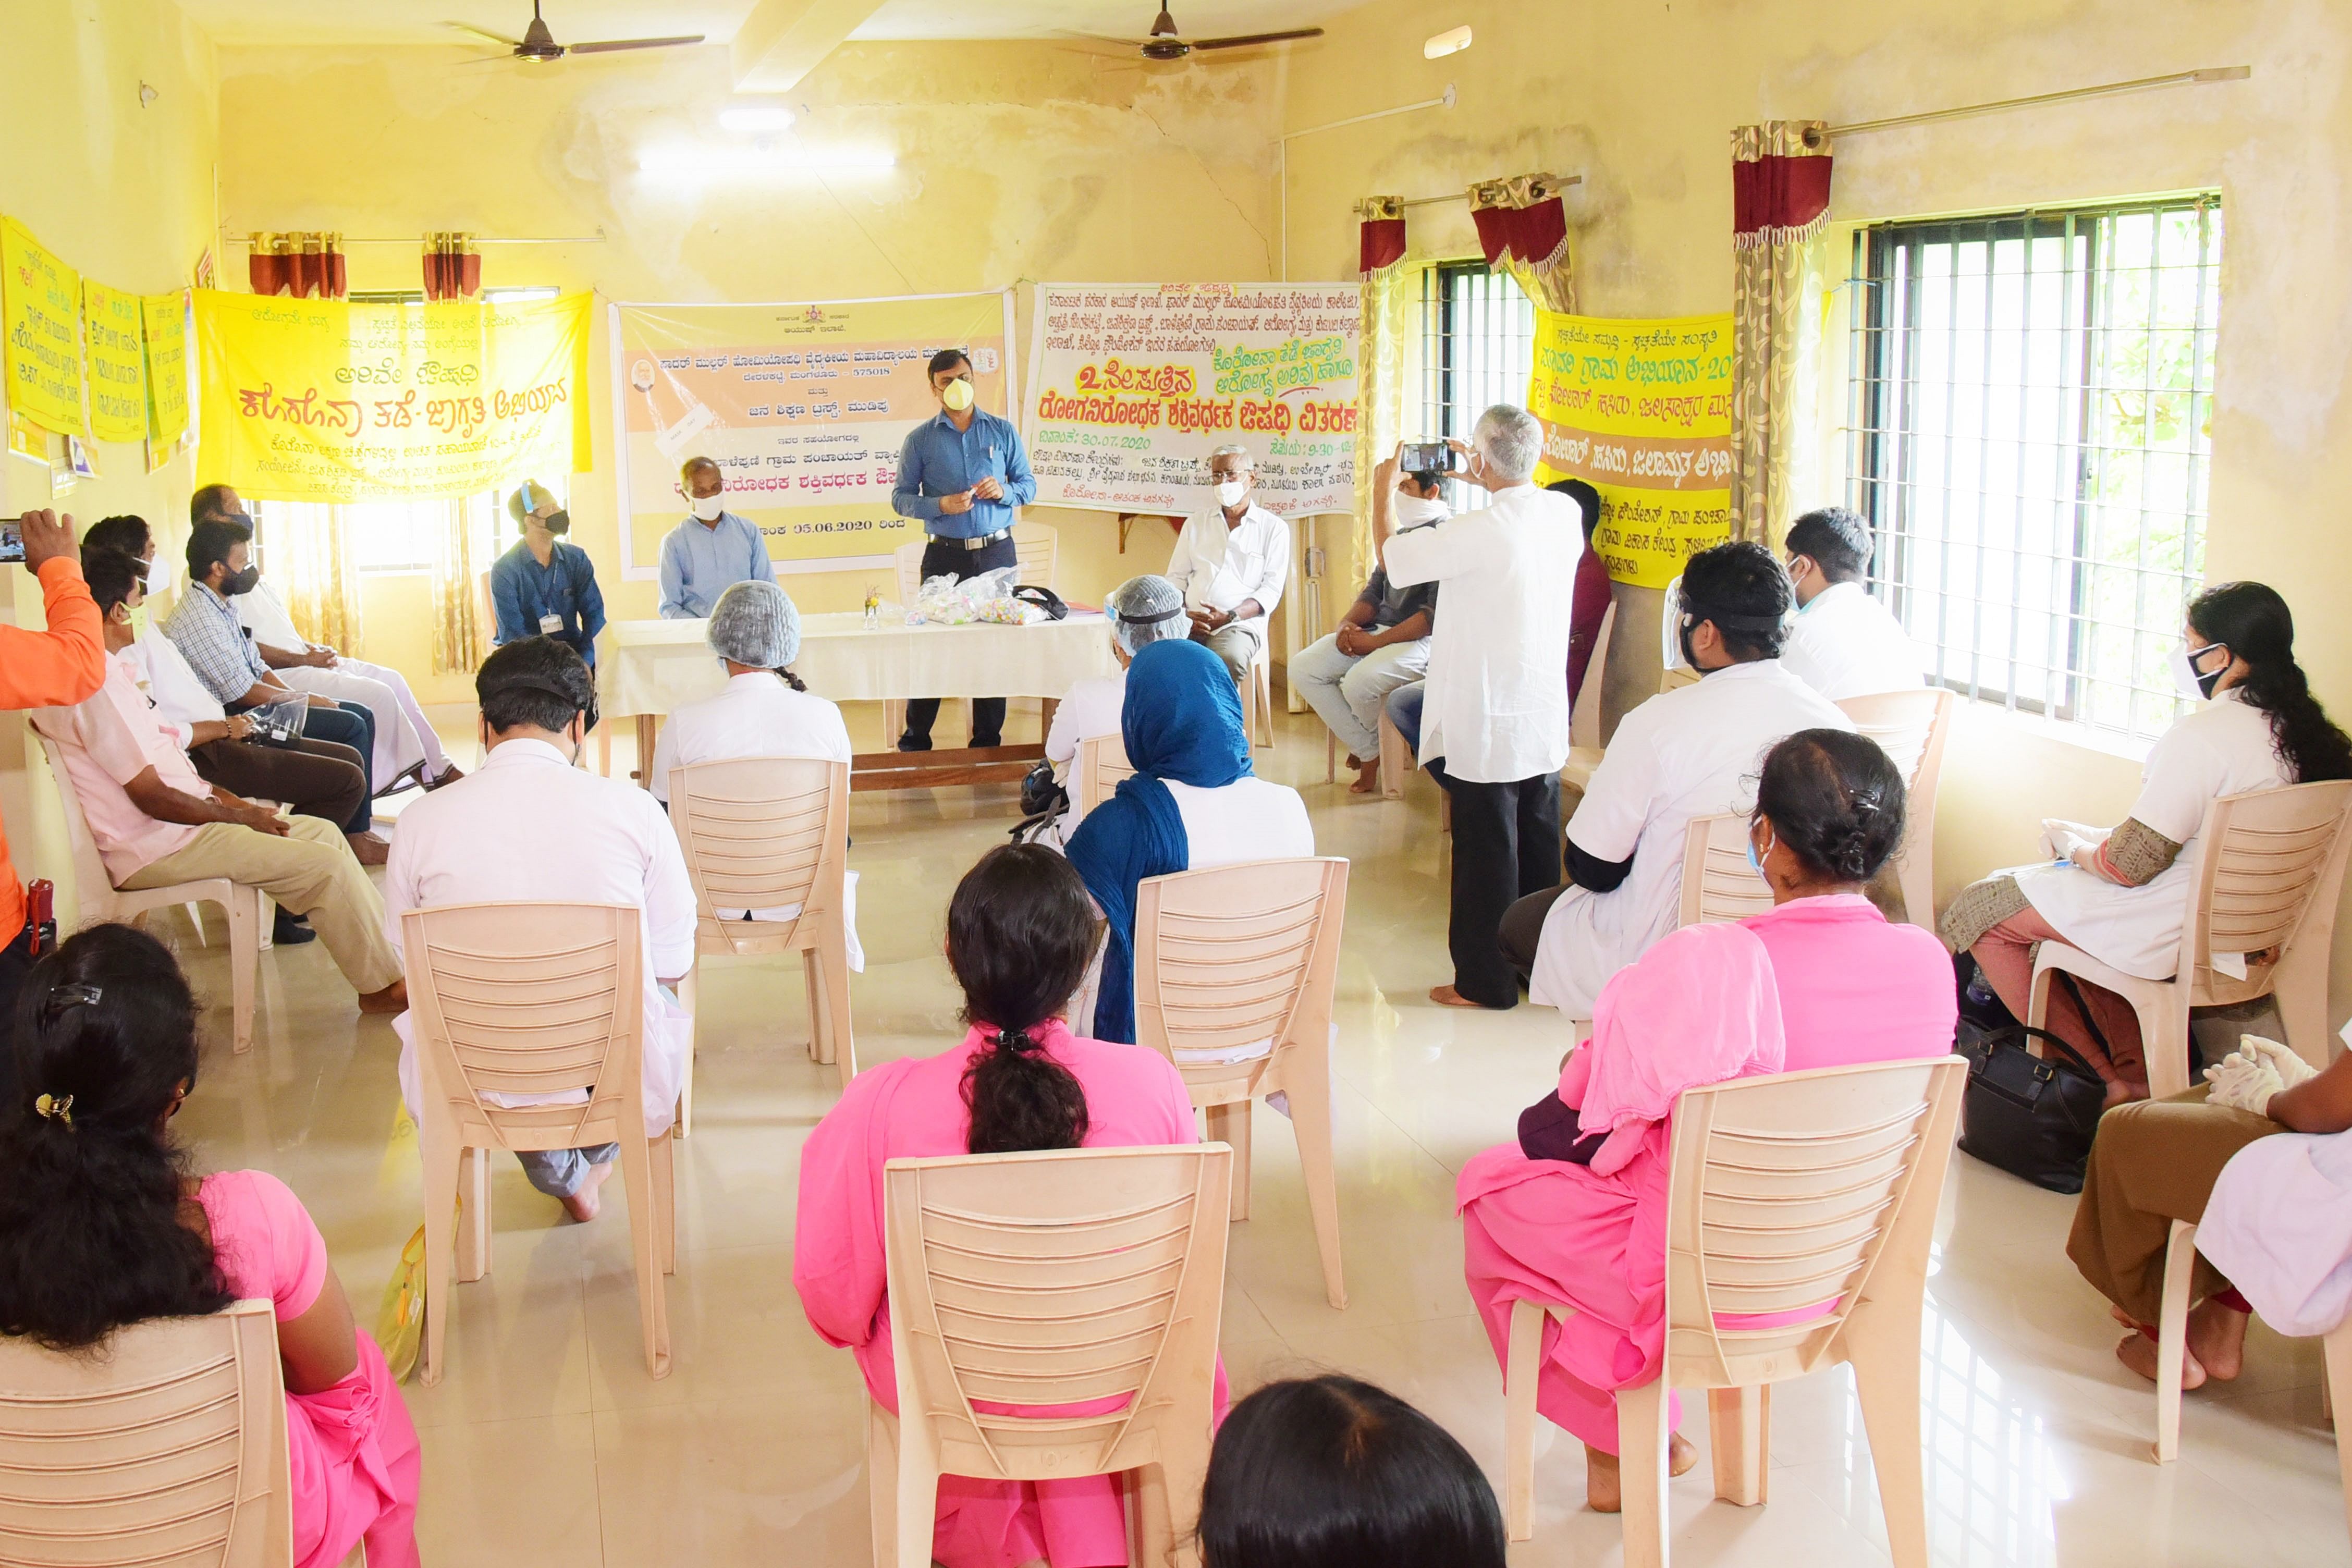 DK ZP CEO Dr Selvamani speaks at a programme organised to create awareness on Covid-19 and to distribute immunity boosting medicines at Balepuni gram panchayat in Bantwal. The programme was jointly organised by Fr Muller Homoeopathic Medical College, Ayush department, Jana Shikshana Trust, Selco Foundation, Department of Health and Family Welfare